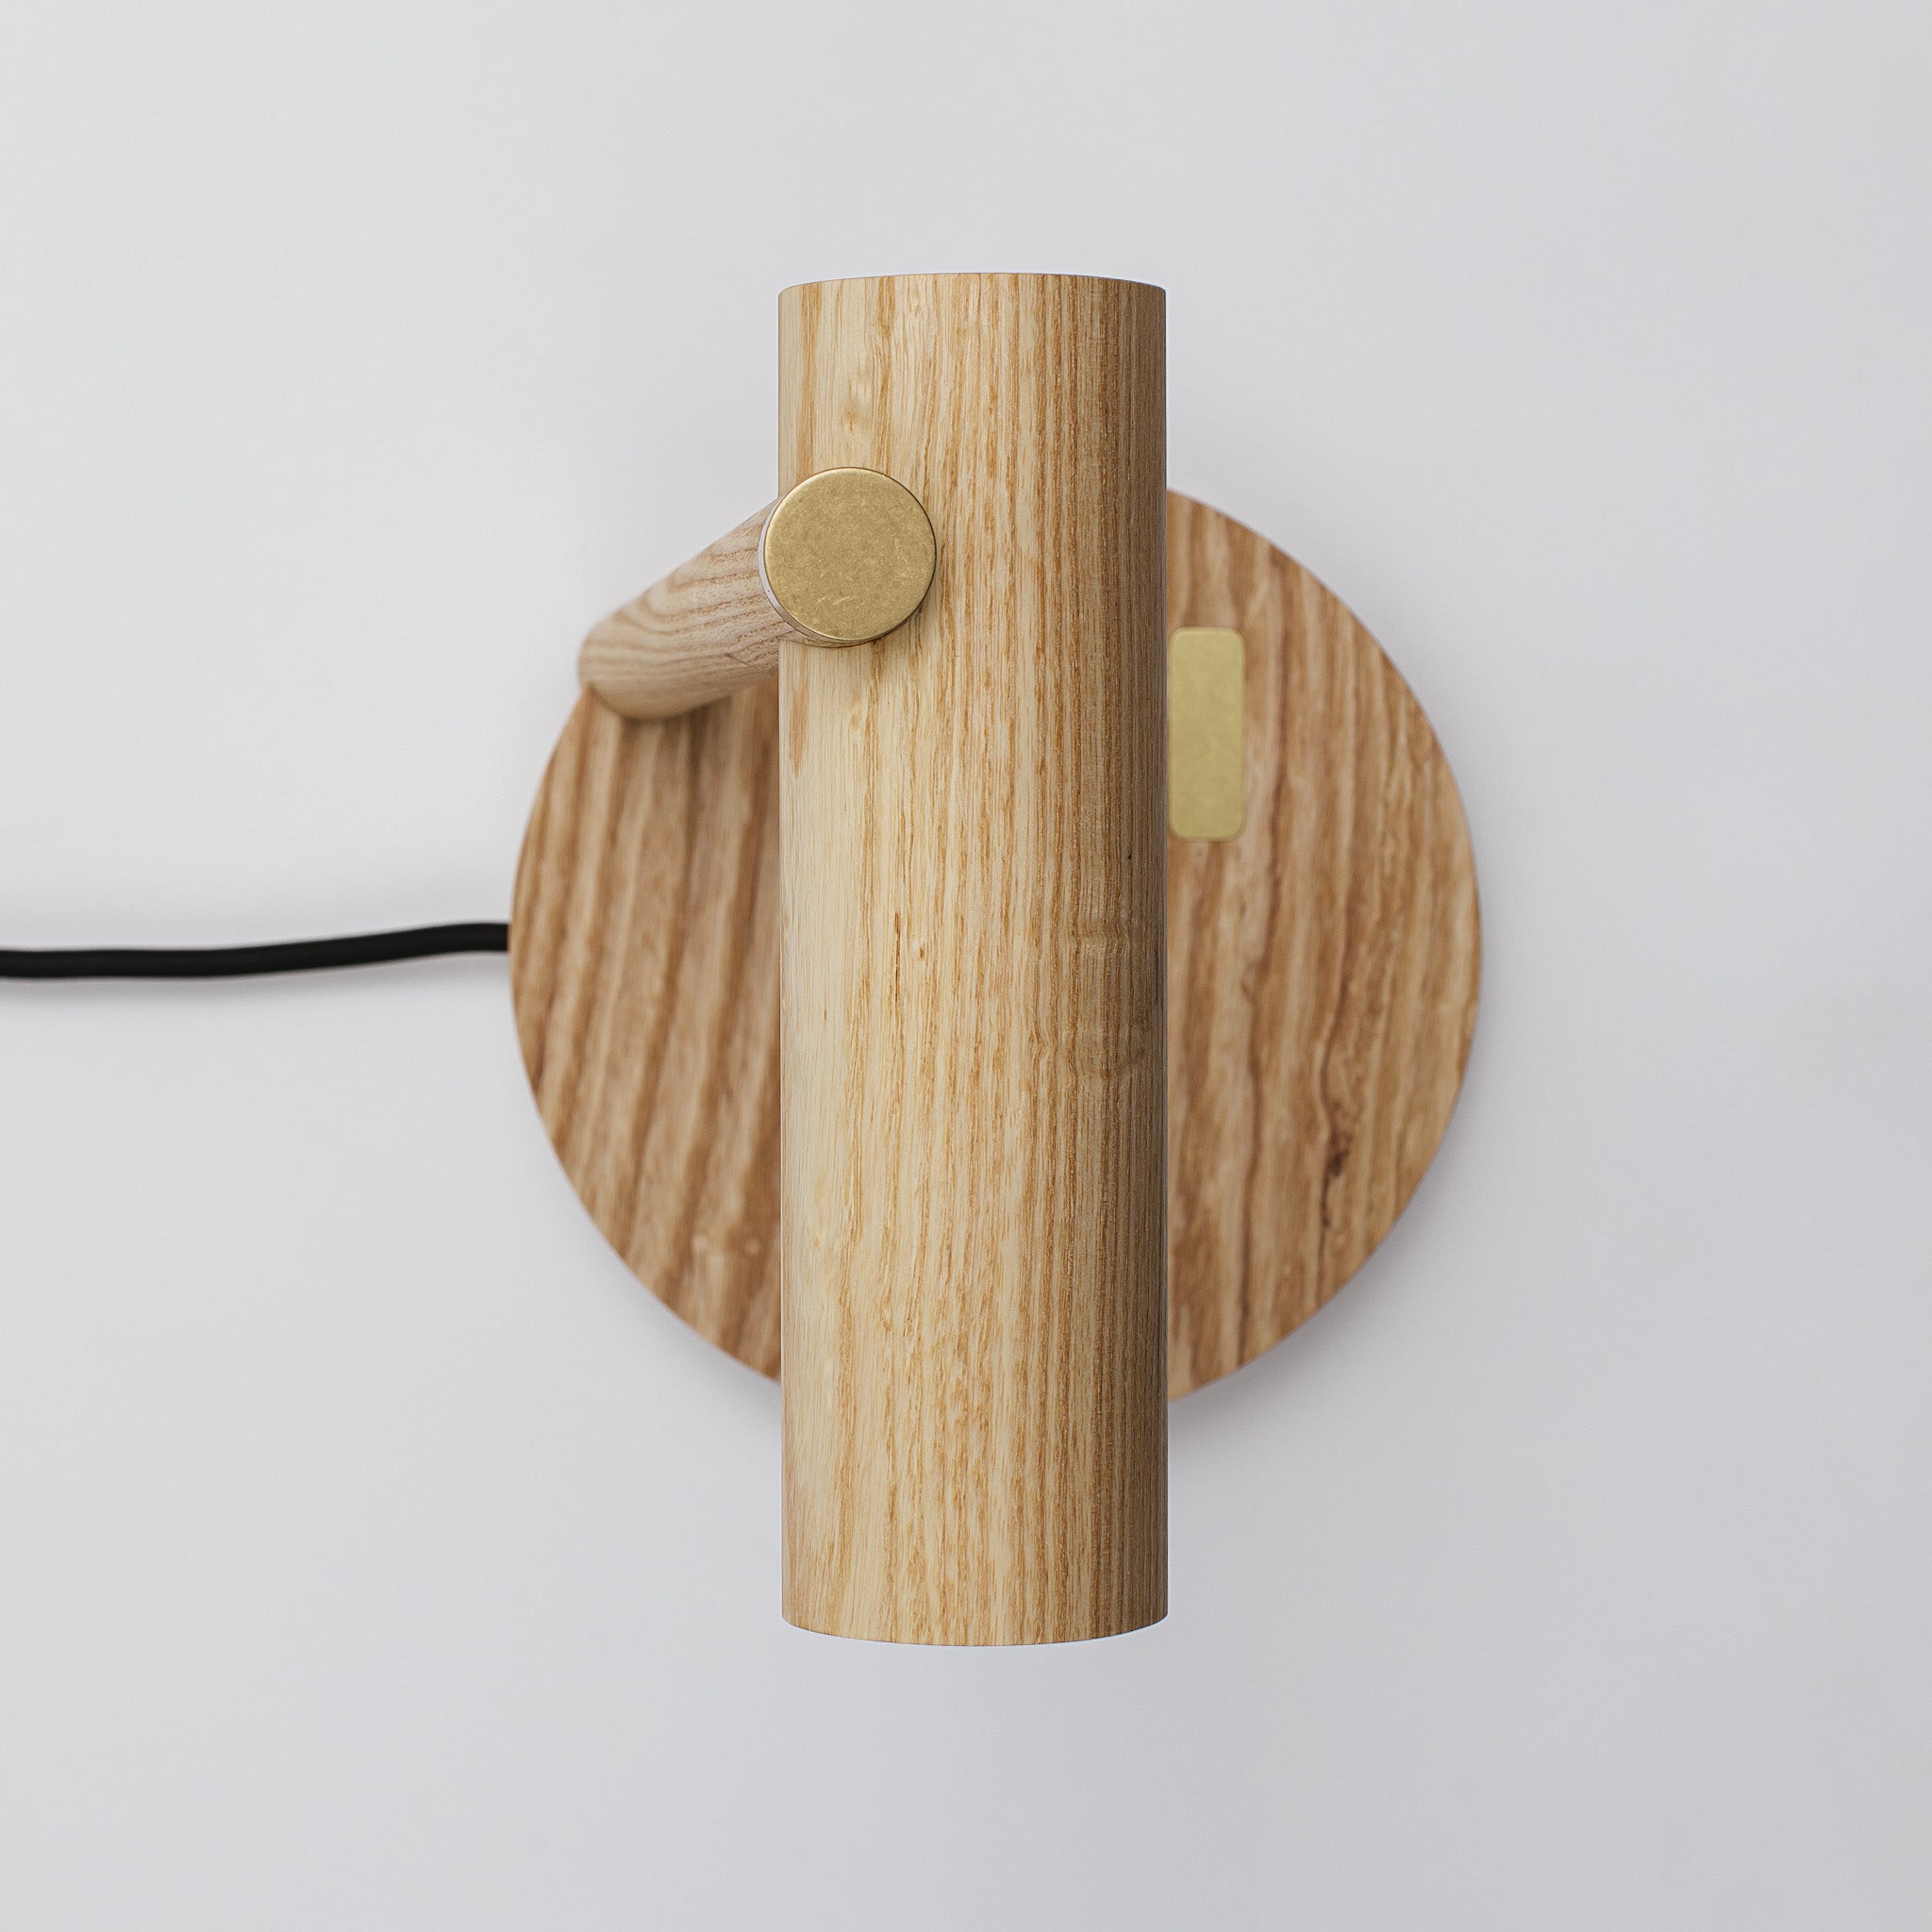 Clean and minimally designed solid wood office lamp -ash